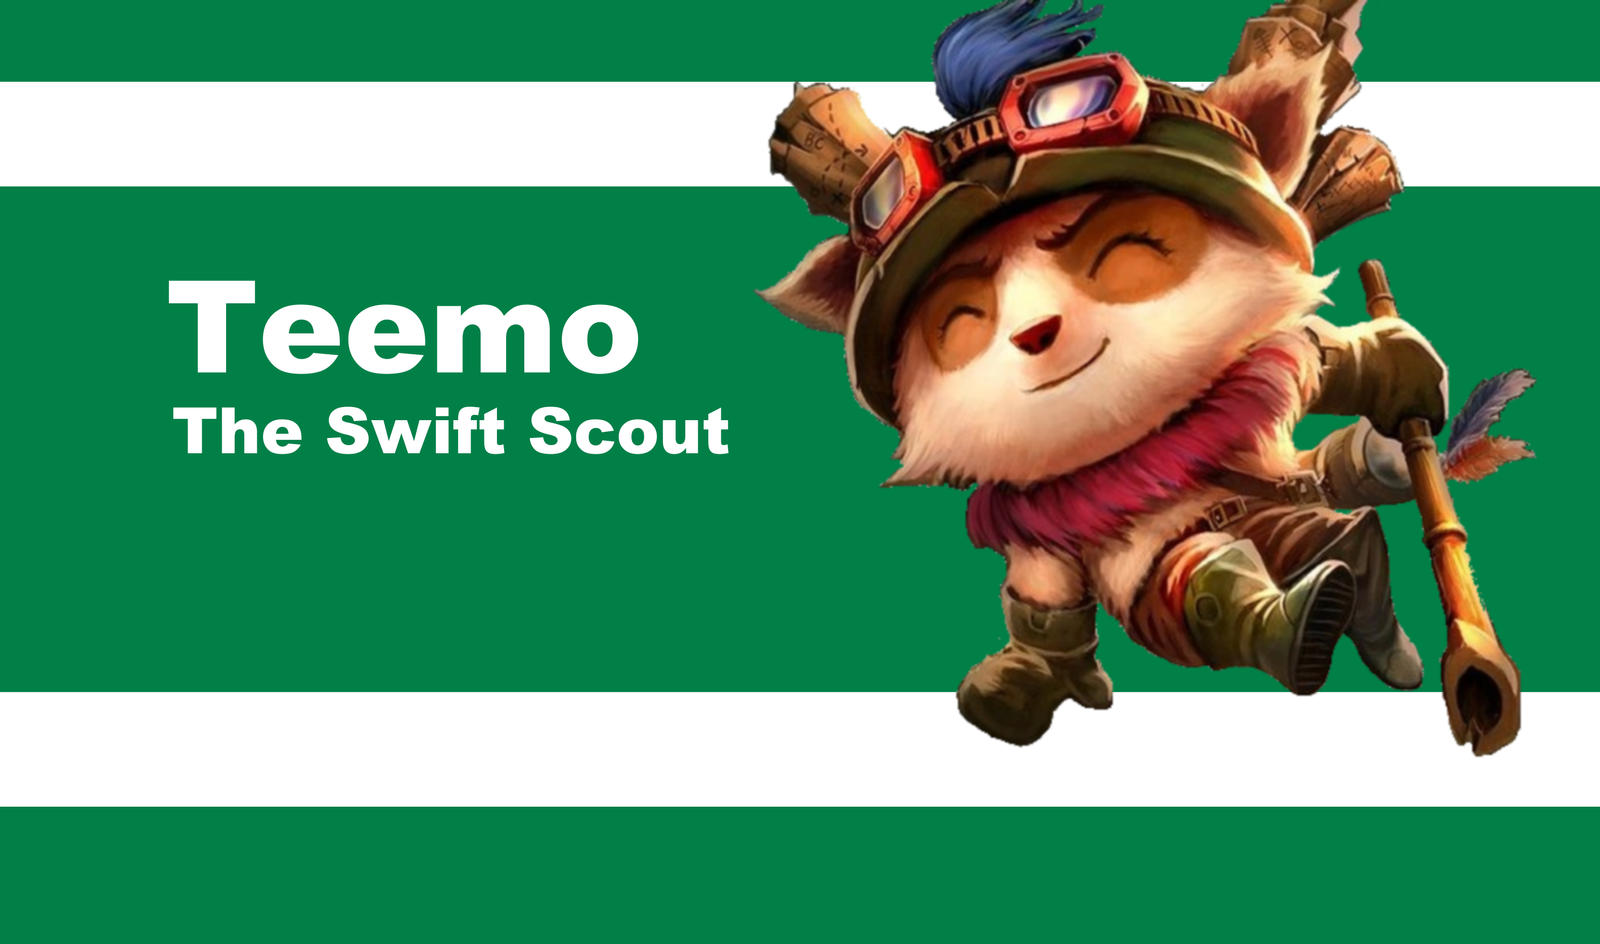 teemo_non_silhouette_by_lolcryocore-d6sovet.jpg